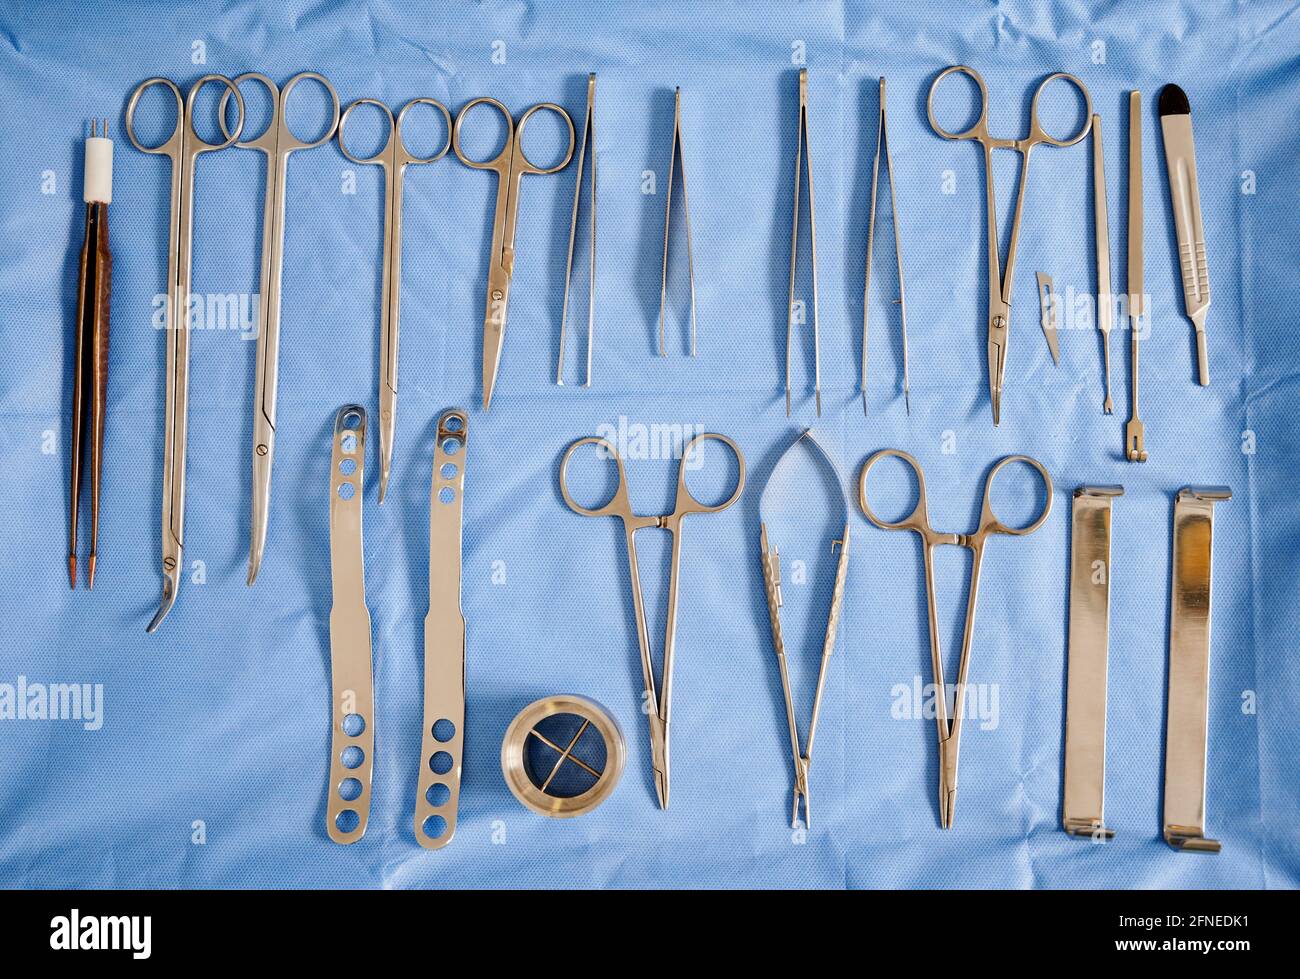 Set of various stainless steel tools for plastic surgery: curved scissors, forceps, scalpel and tweezers in operating room. Concept of aesthetic surgery, medical instruments and preparation. Top view Stock Photo